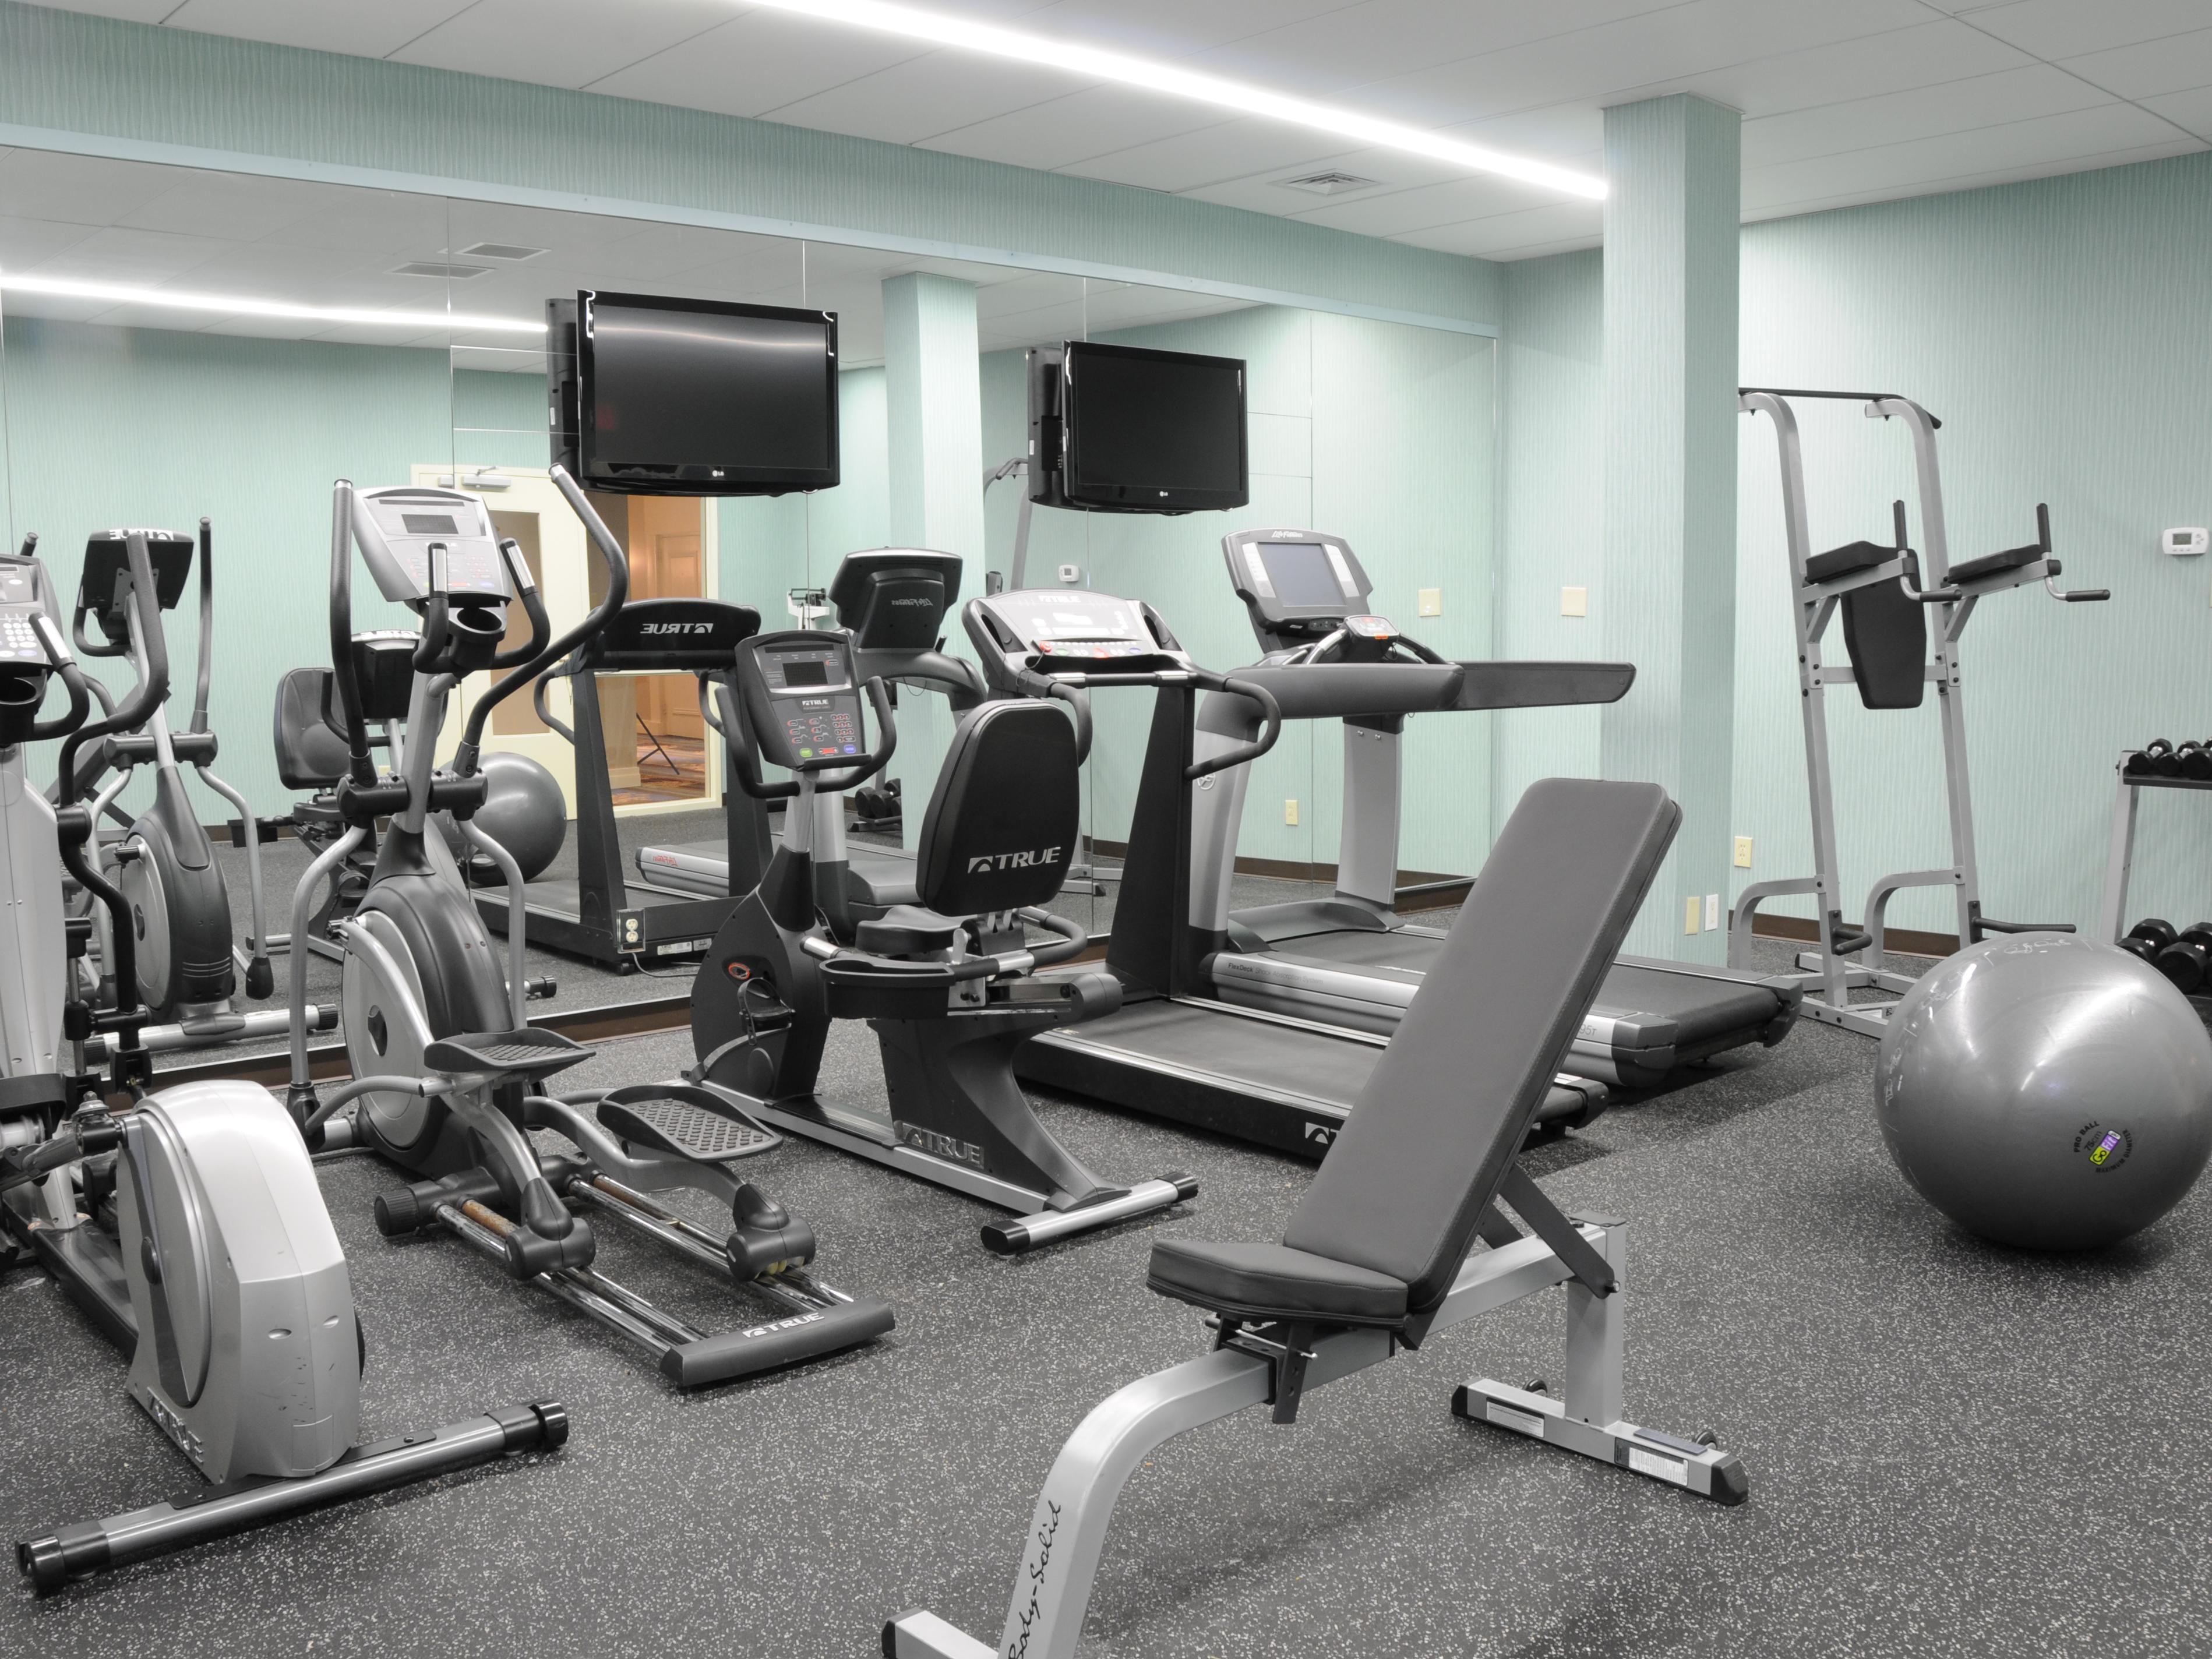 Stay in shape while you're away from home. Start your day with an energetic workout in our 24-hour Fitness Center. Our state-of-the-art Fitness Center features elliptical machines, a stair stepper, a stationary bicycle, a treadmill, and a climber, as well as free weights.